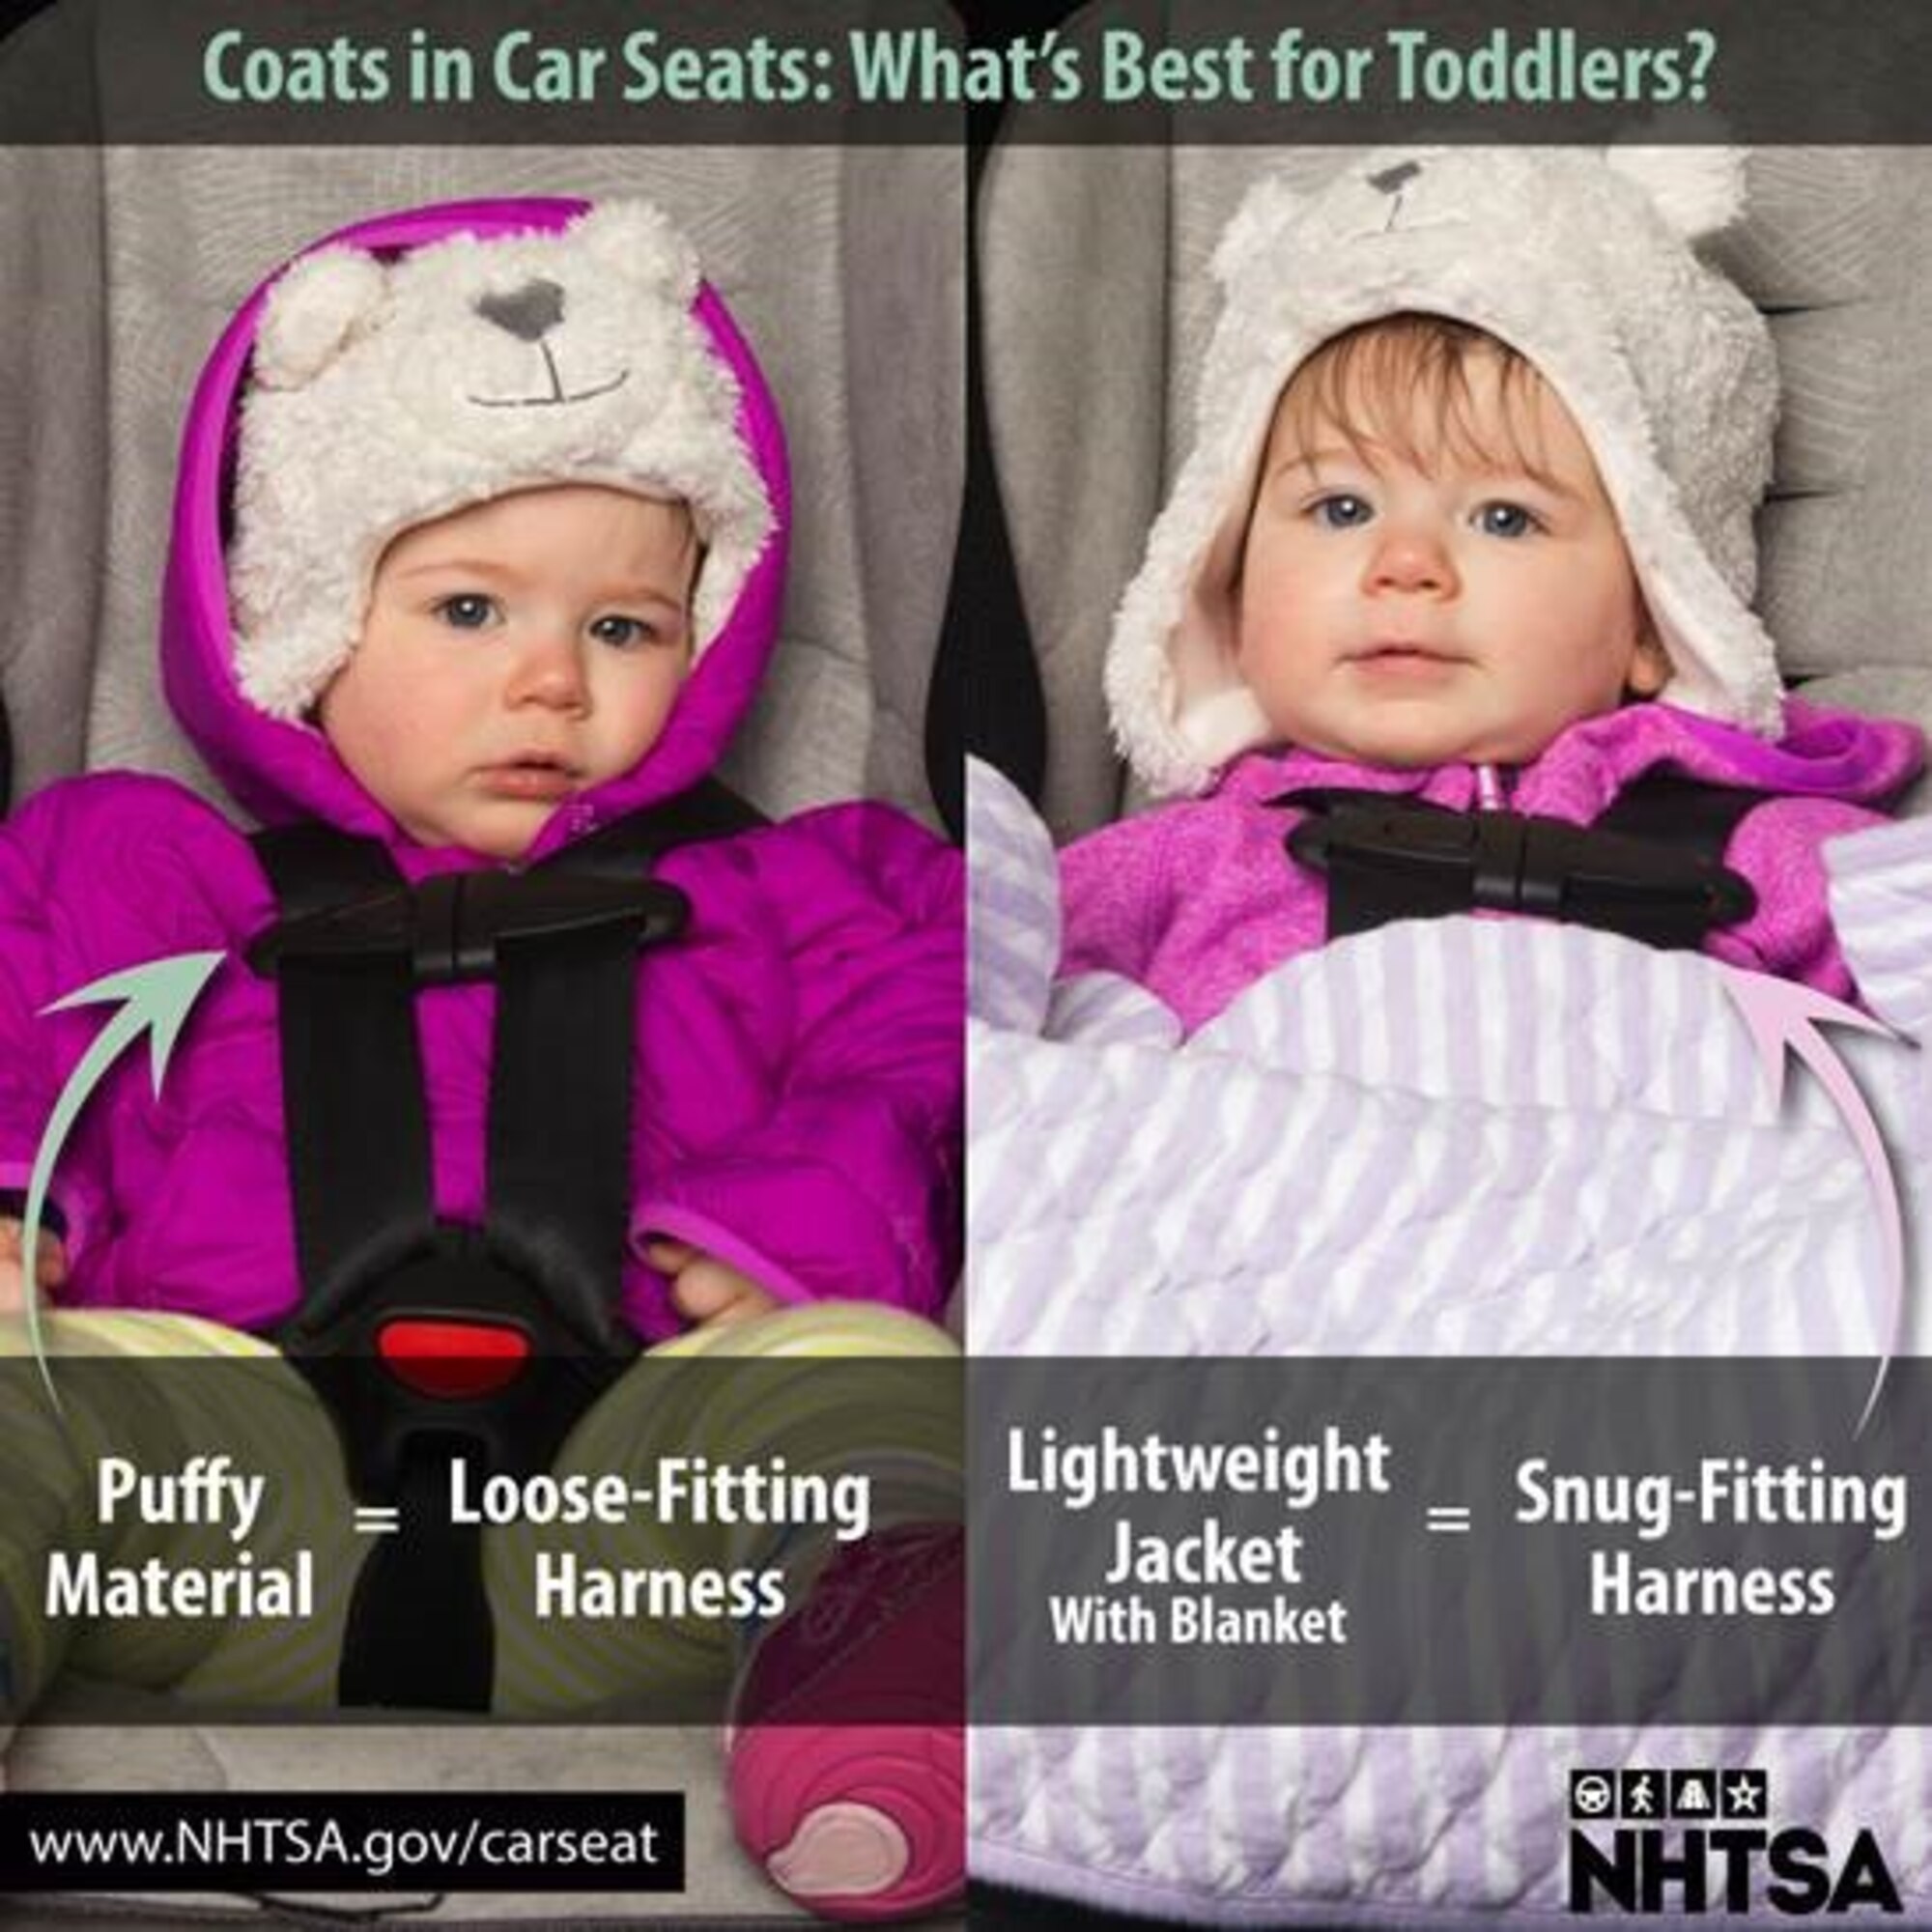 Coats in Car Seats: What's Best for Toddlers? (Courtesy Info-Graphic)